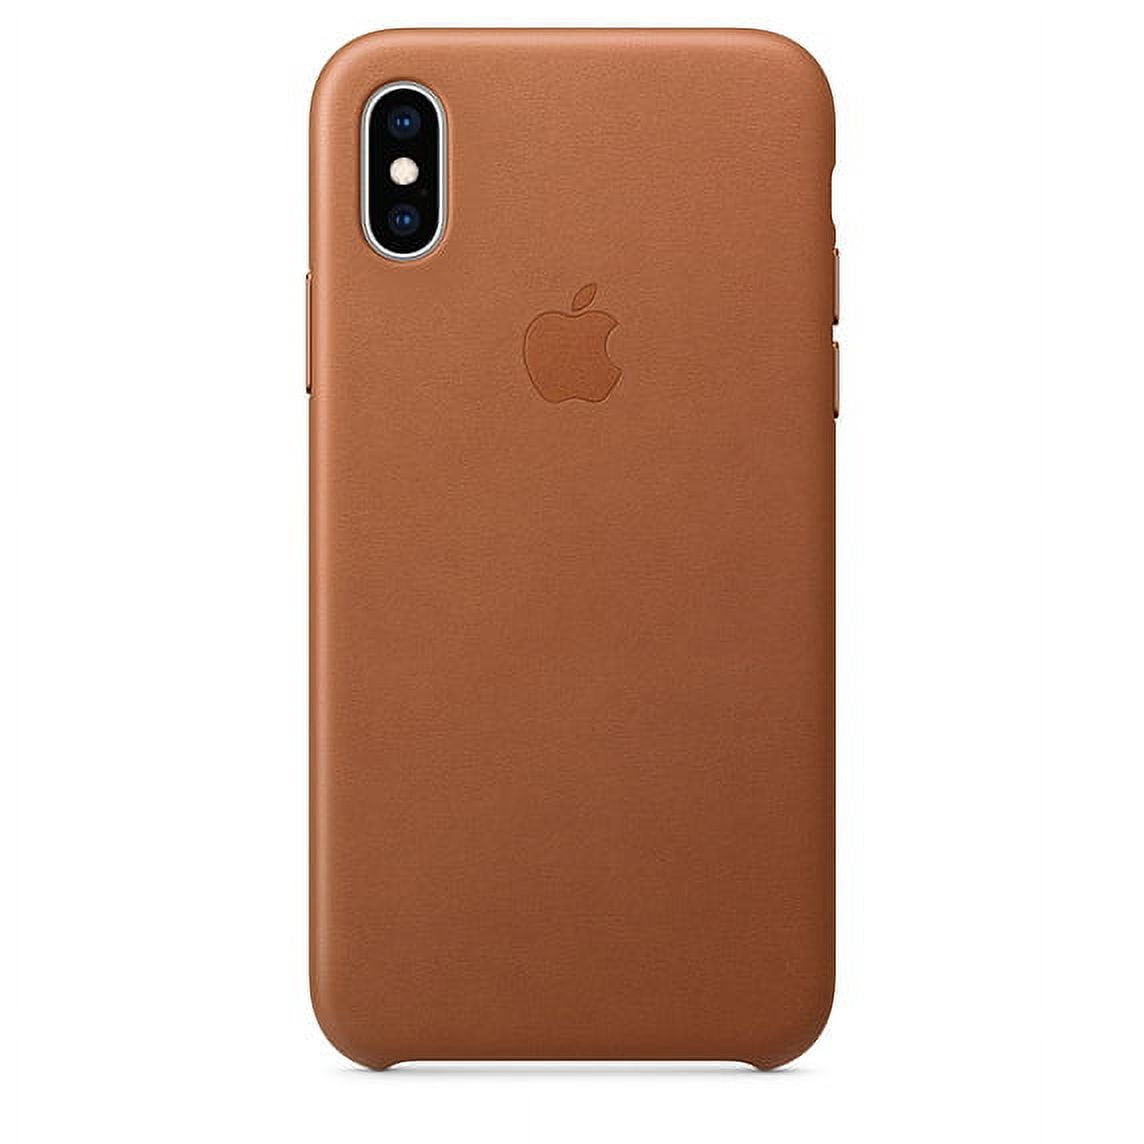 Apple Leather Case for iPhone XS Max - Taupe 